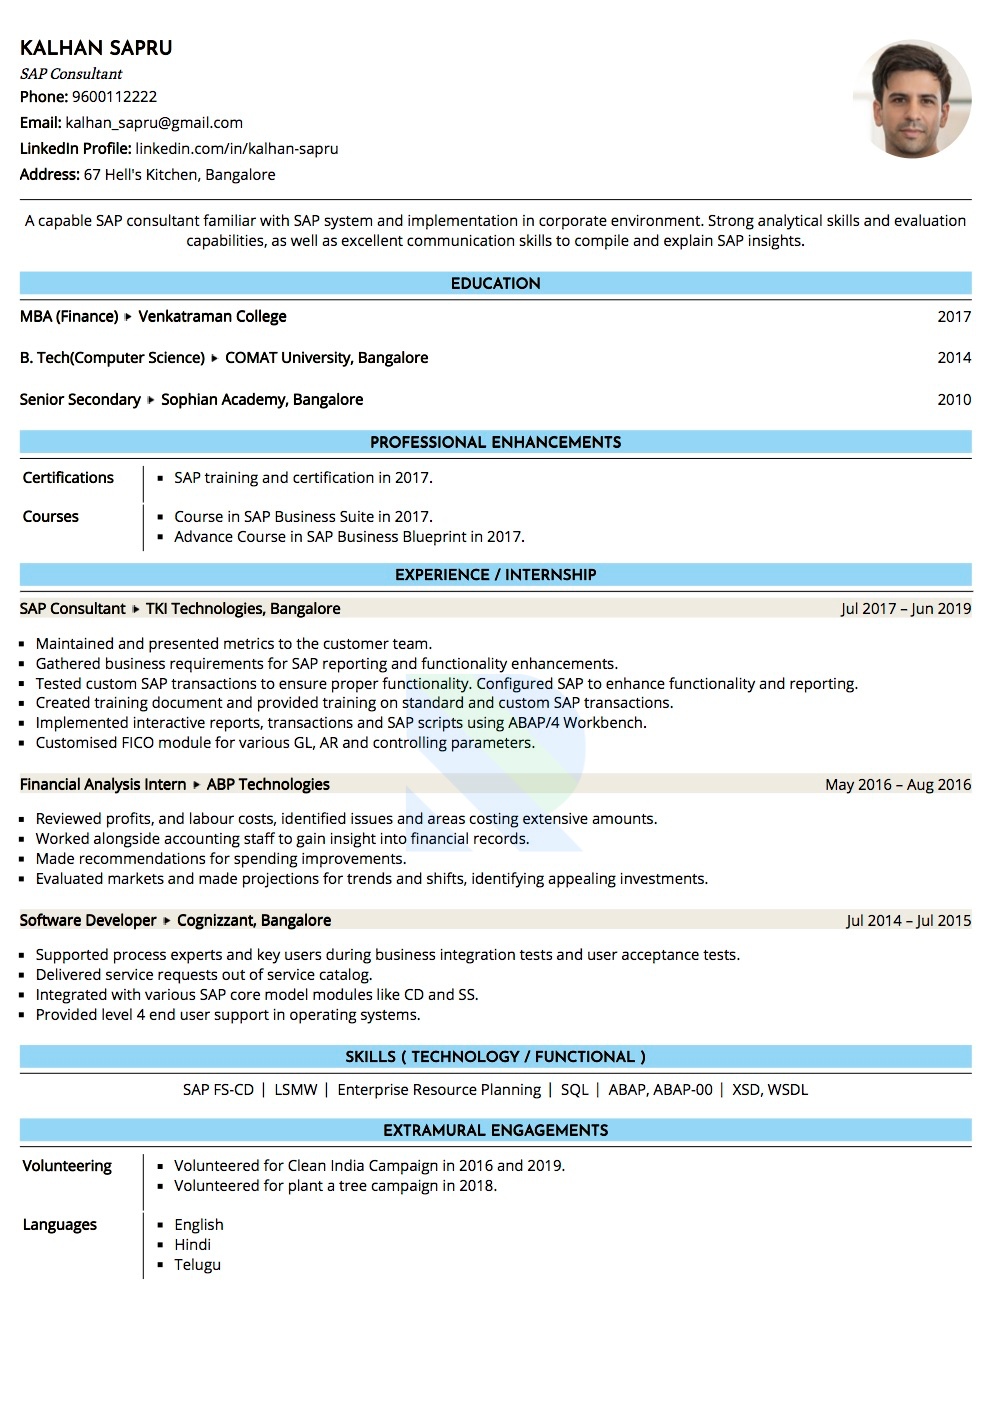 Sample Resume of SAP Consultant  | Free Resume Templates & Samples on Resumod.co